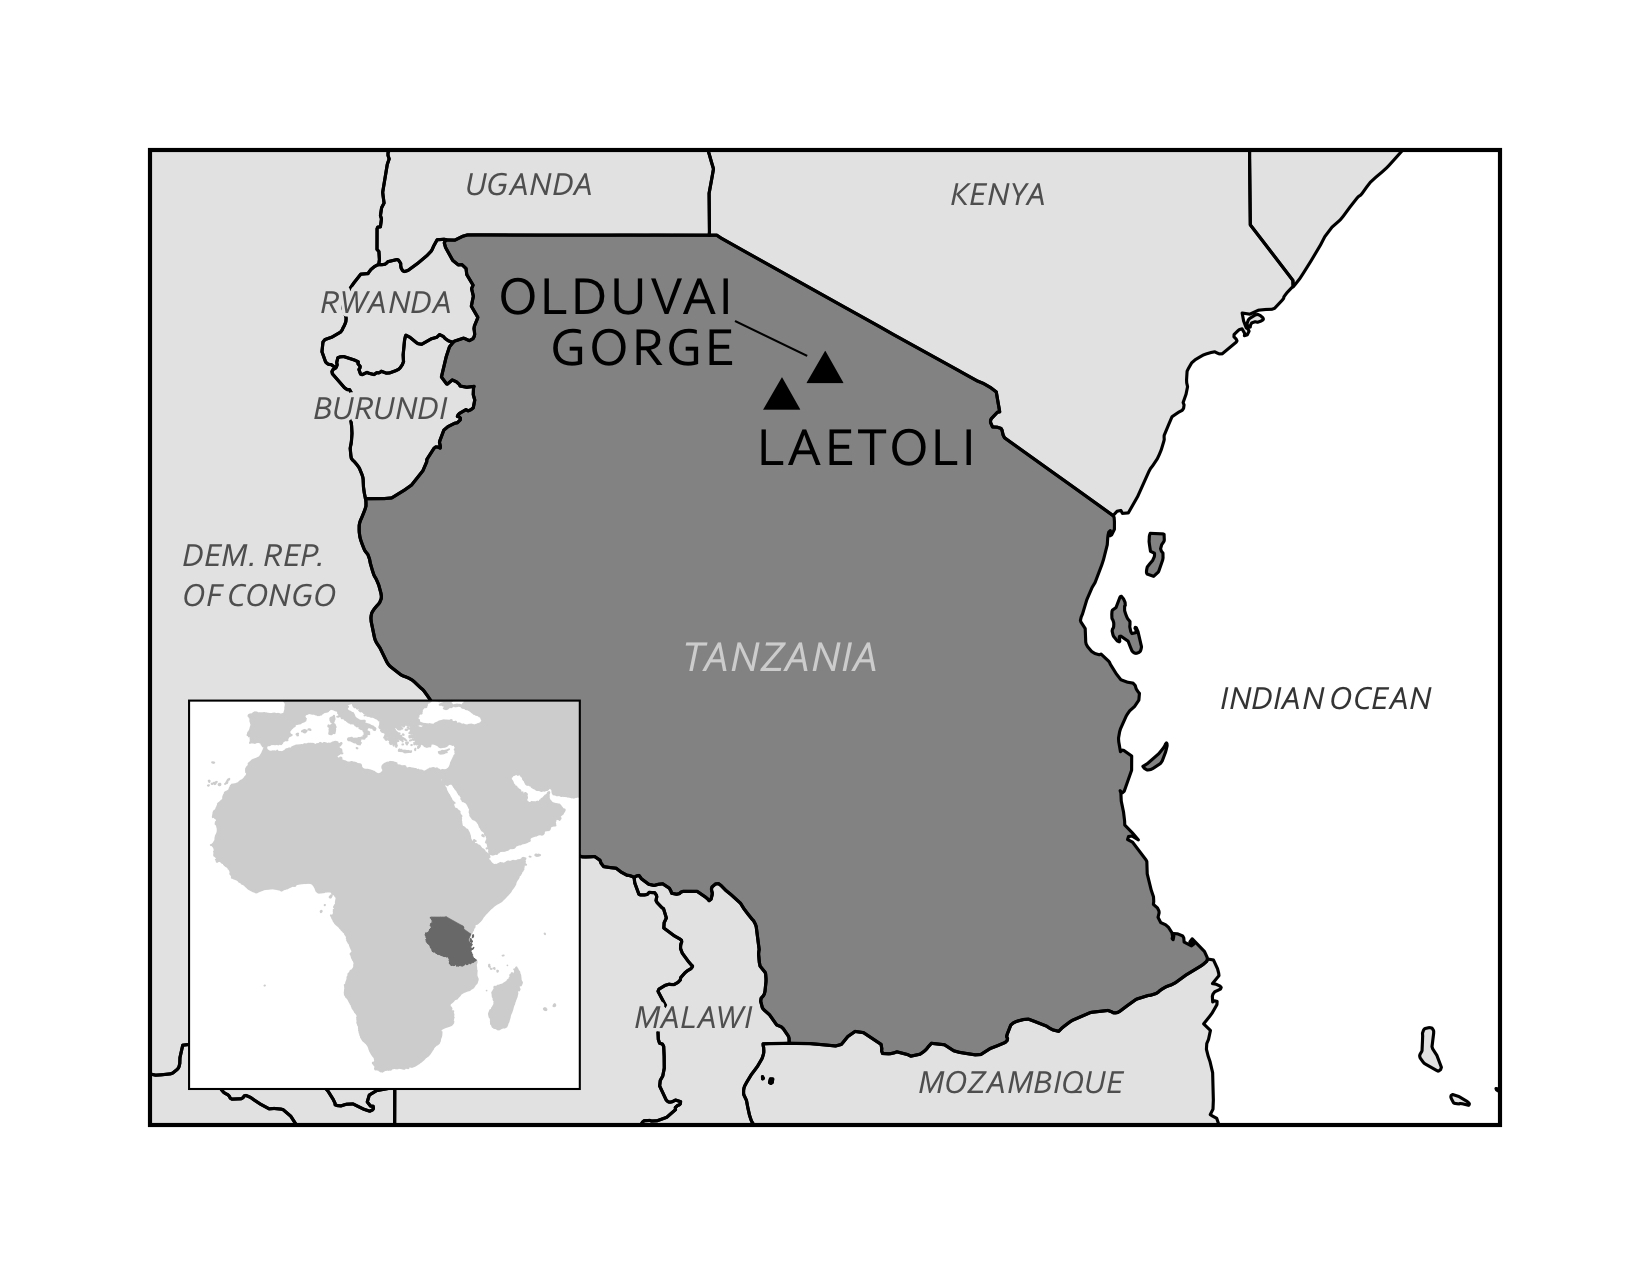 Eastern Africa map shows sites within Tanzania.